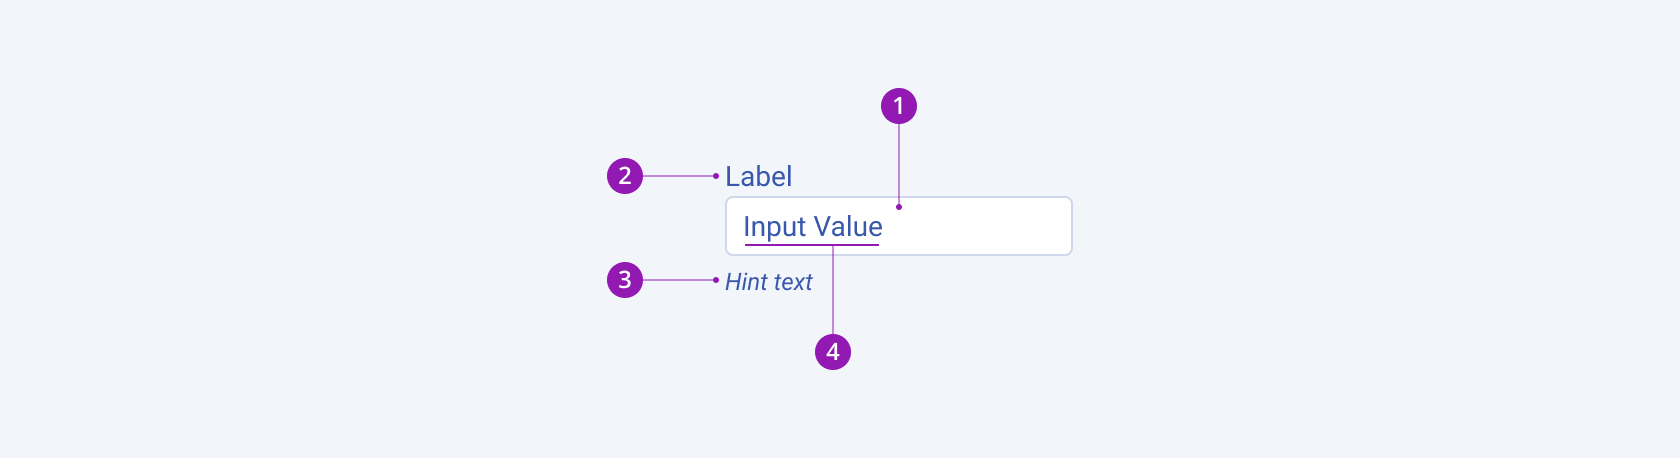 A Telerik and Kendo UI TextBox component with the input field, label, hint text, and placeholder or input value.